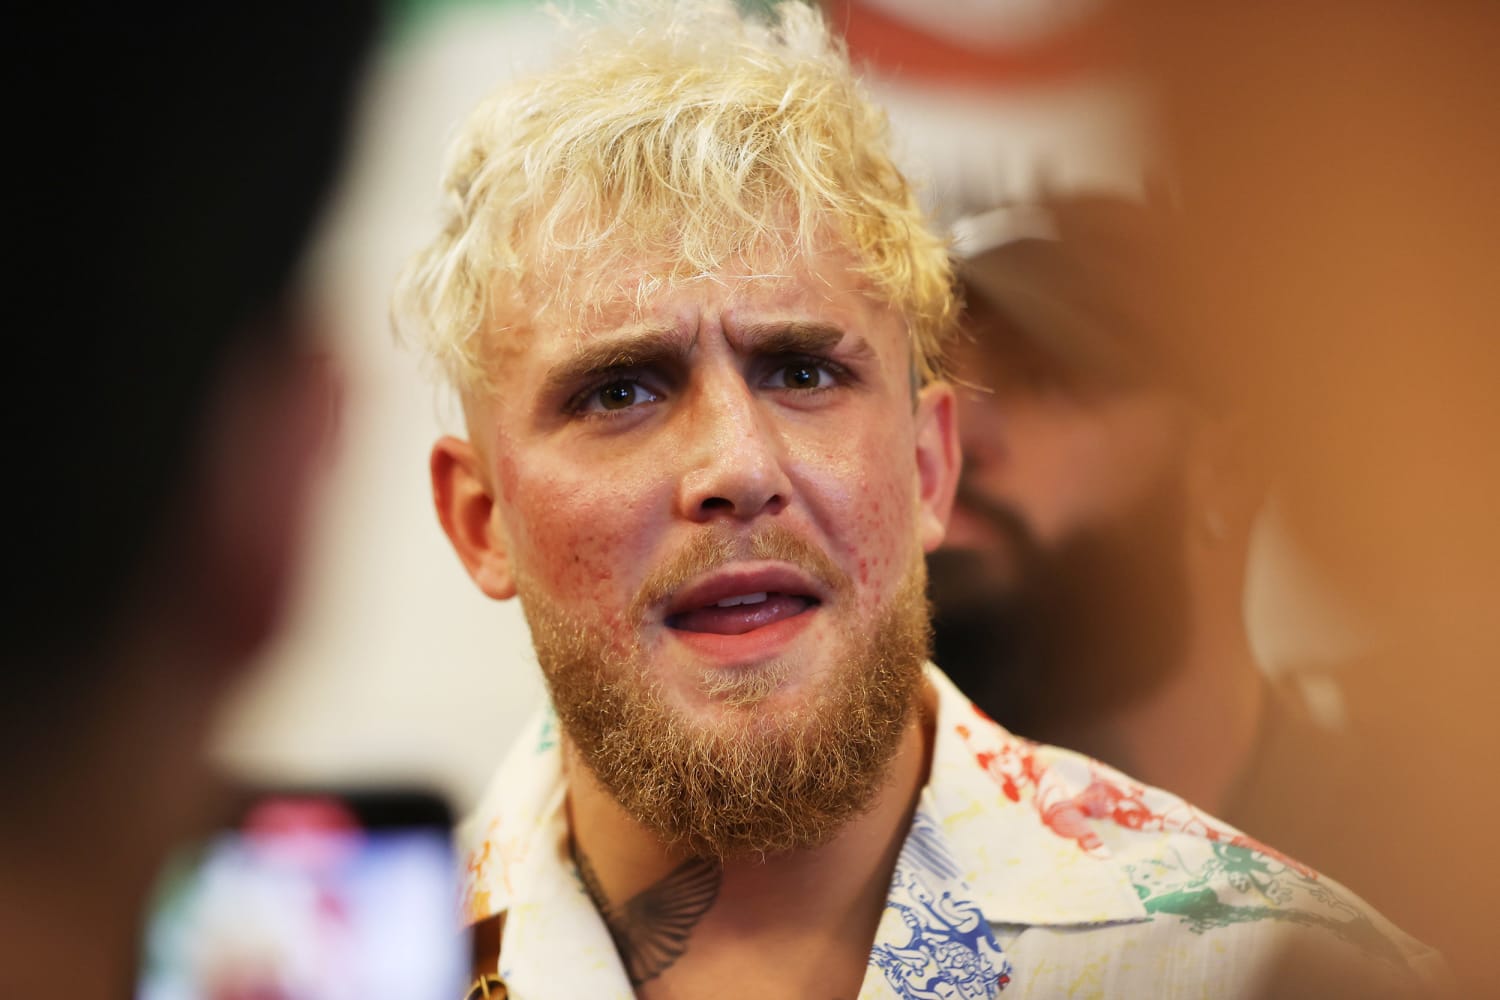 No charges for YouTube star Jake Paul in Arizona mall looting